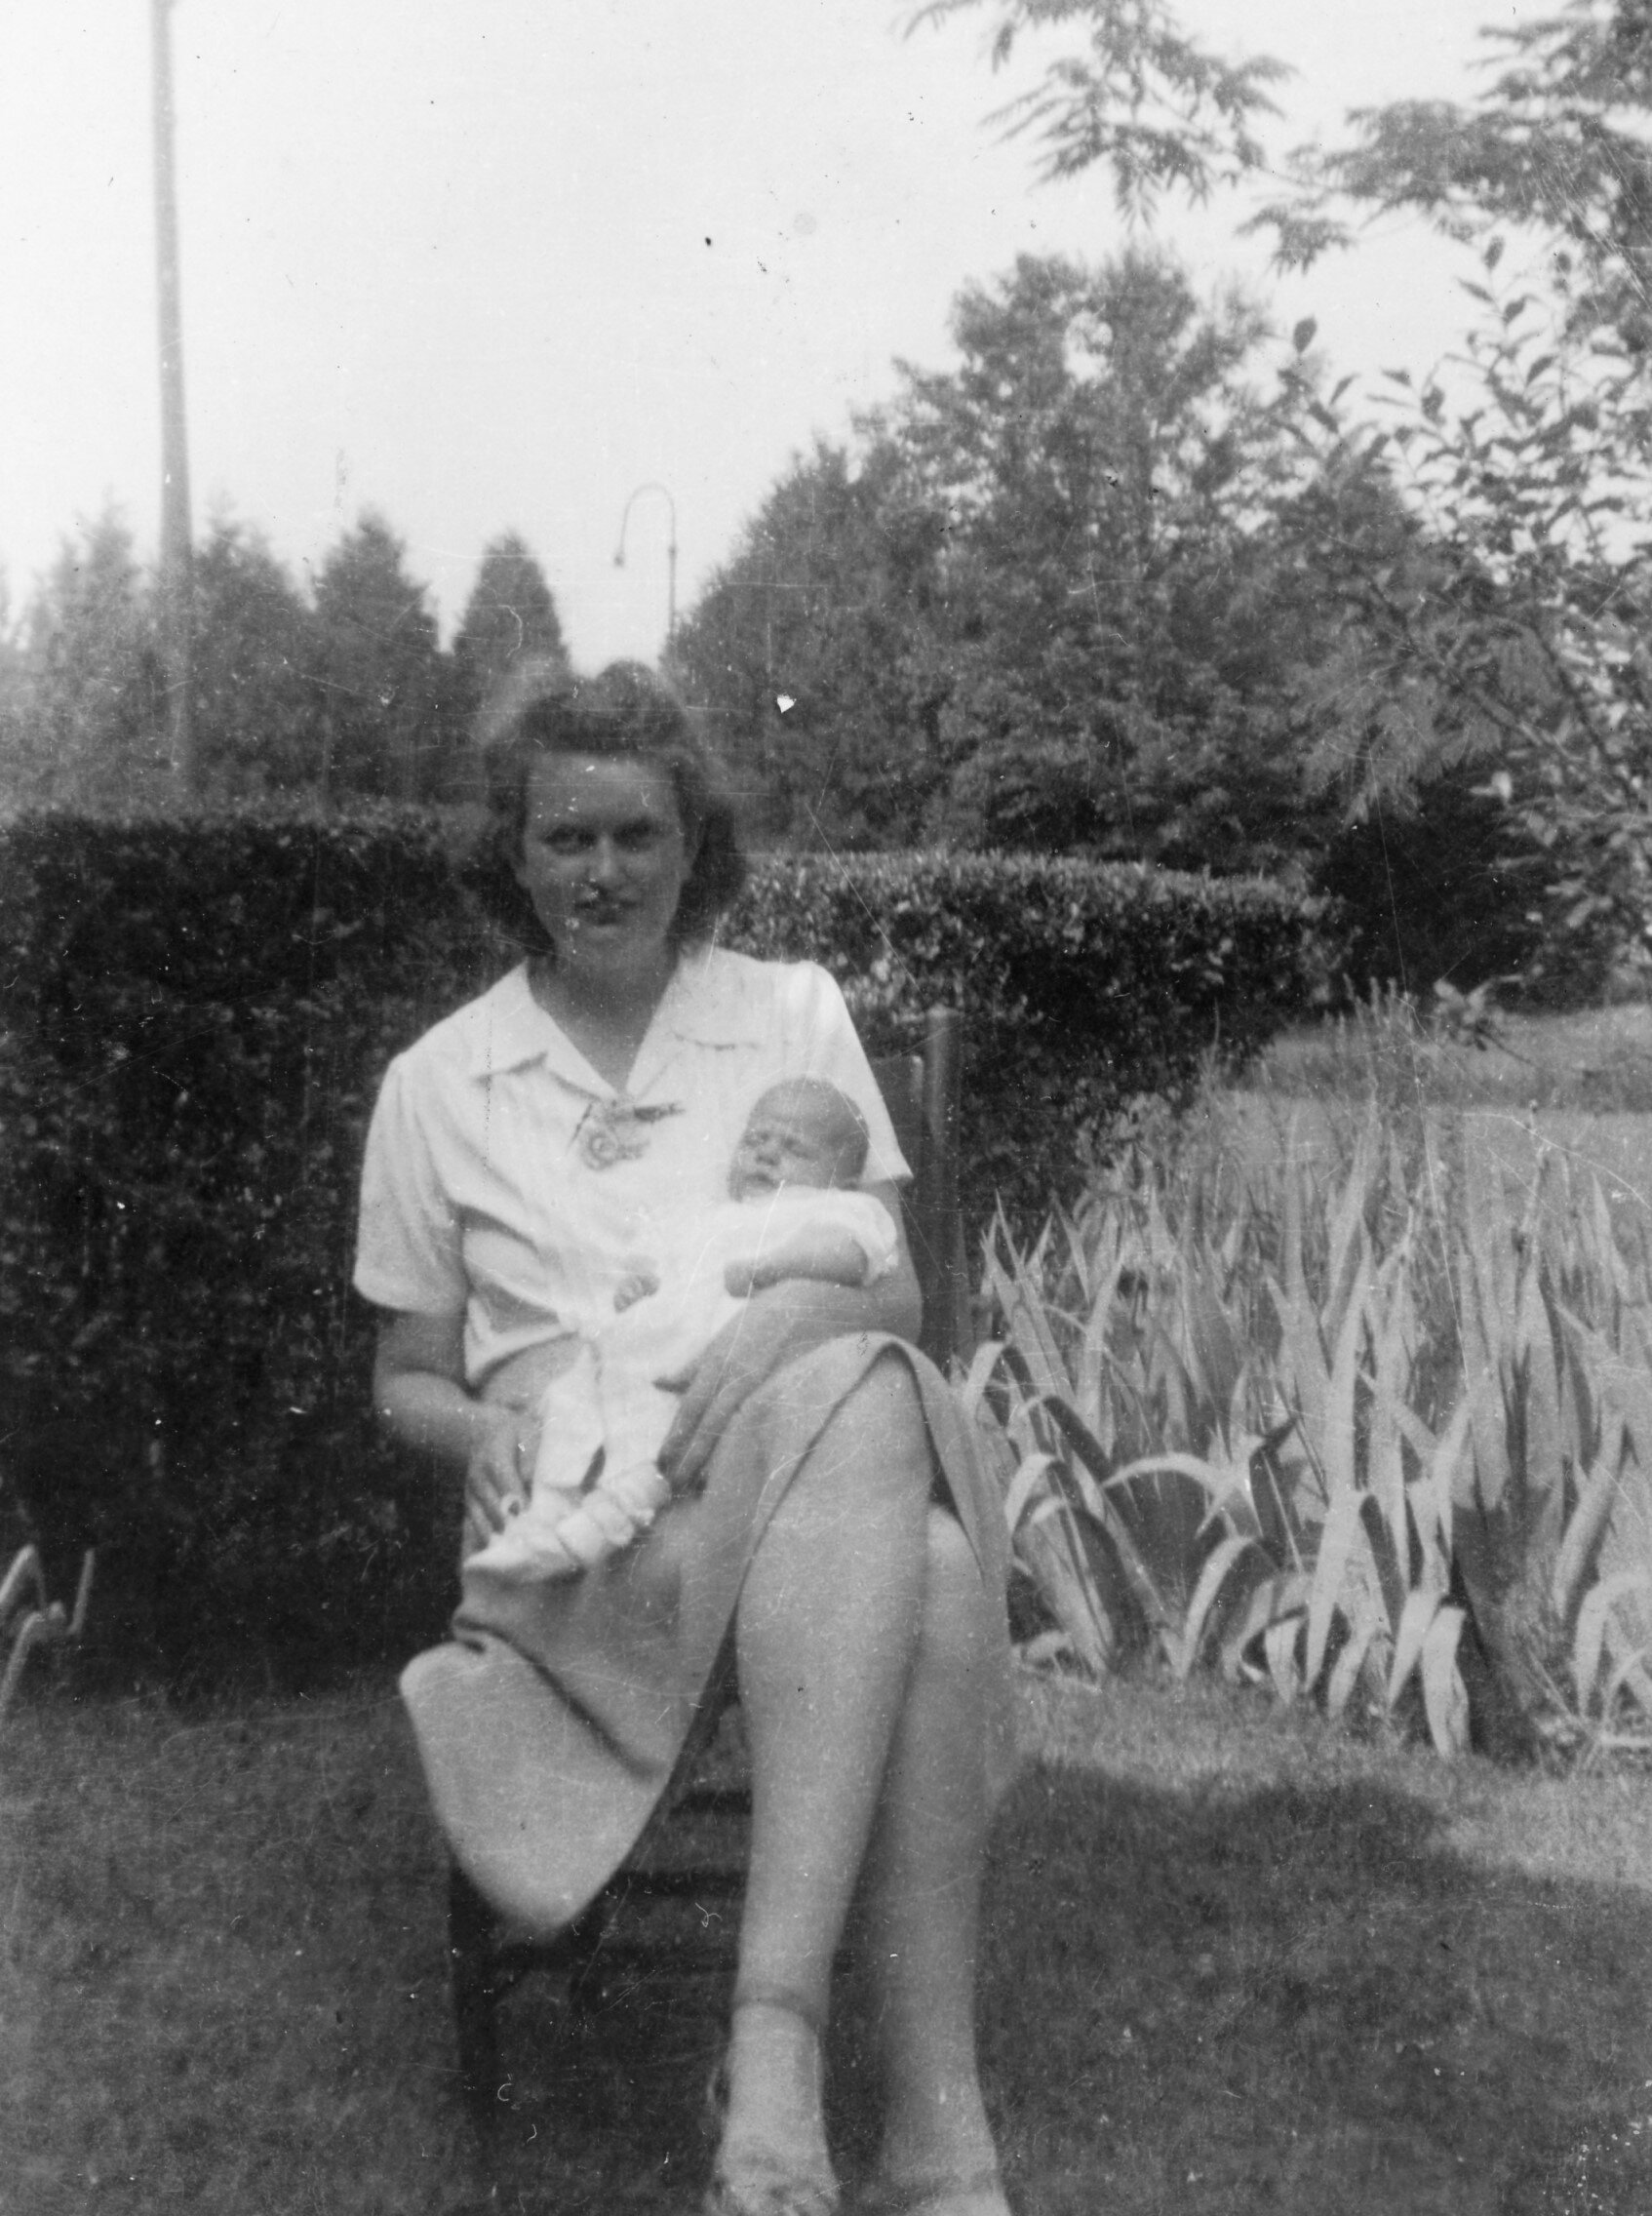  Anne Barnes Chadwick–married to Donald Chadwick–holding their daughter, Patsy, at 6 weeks old 1943 